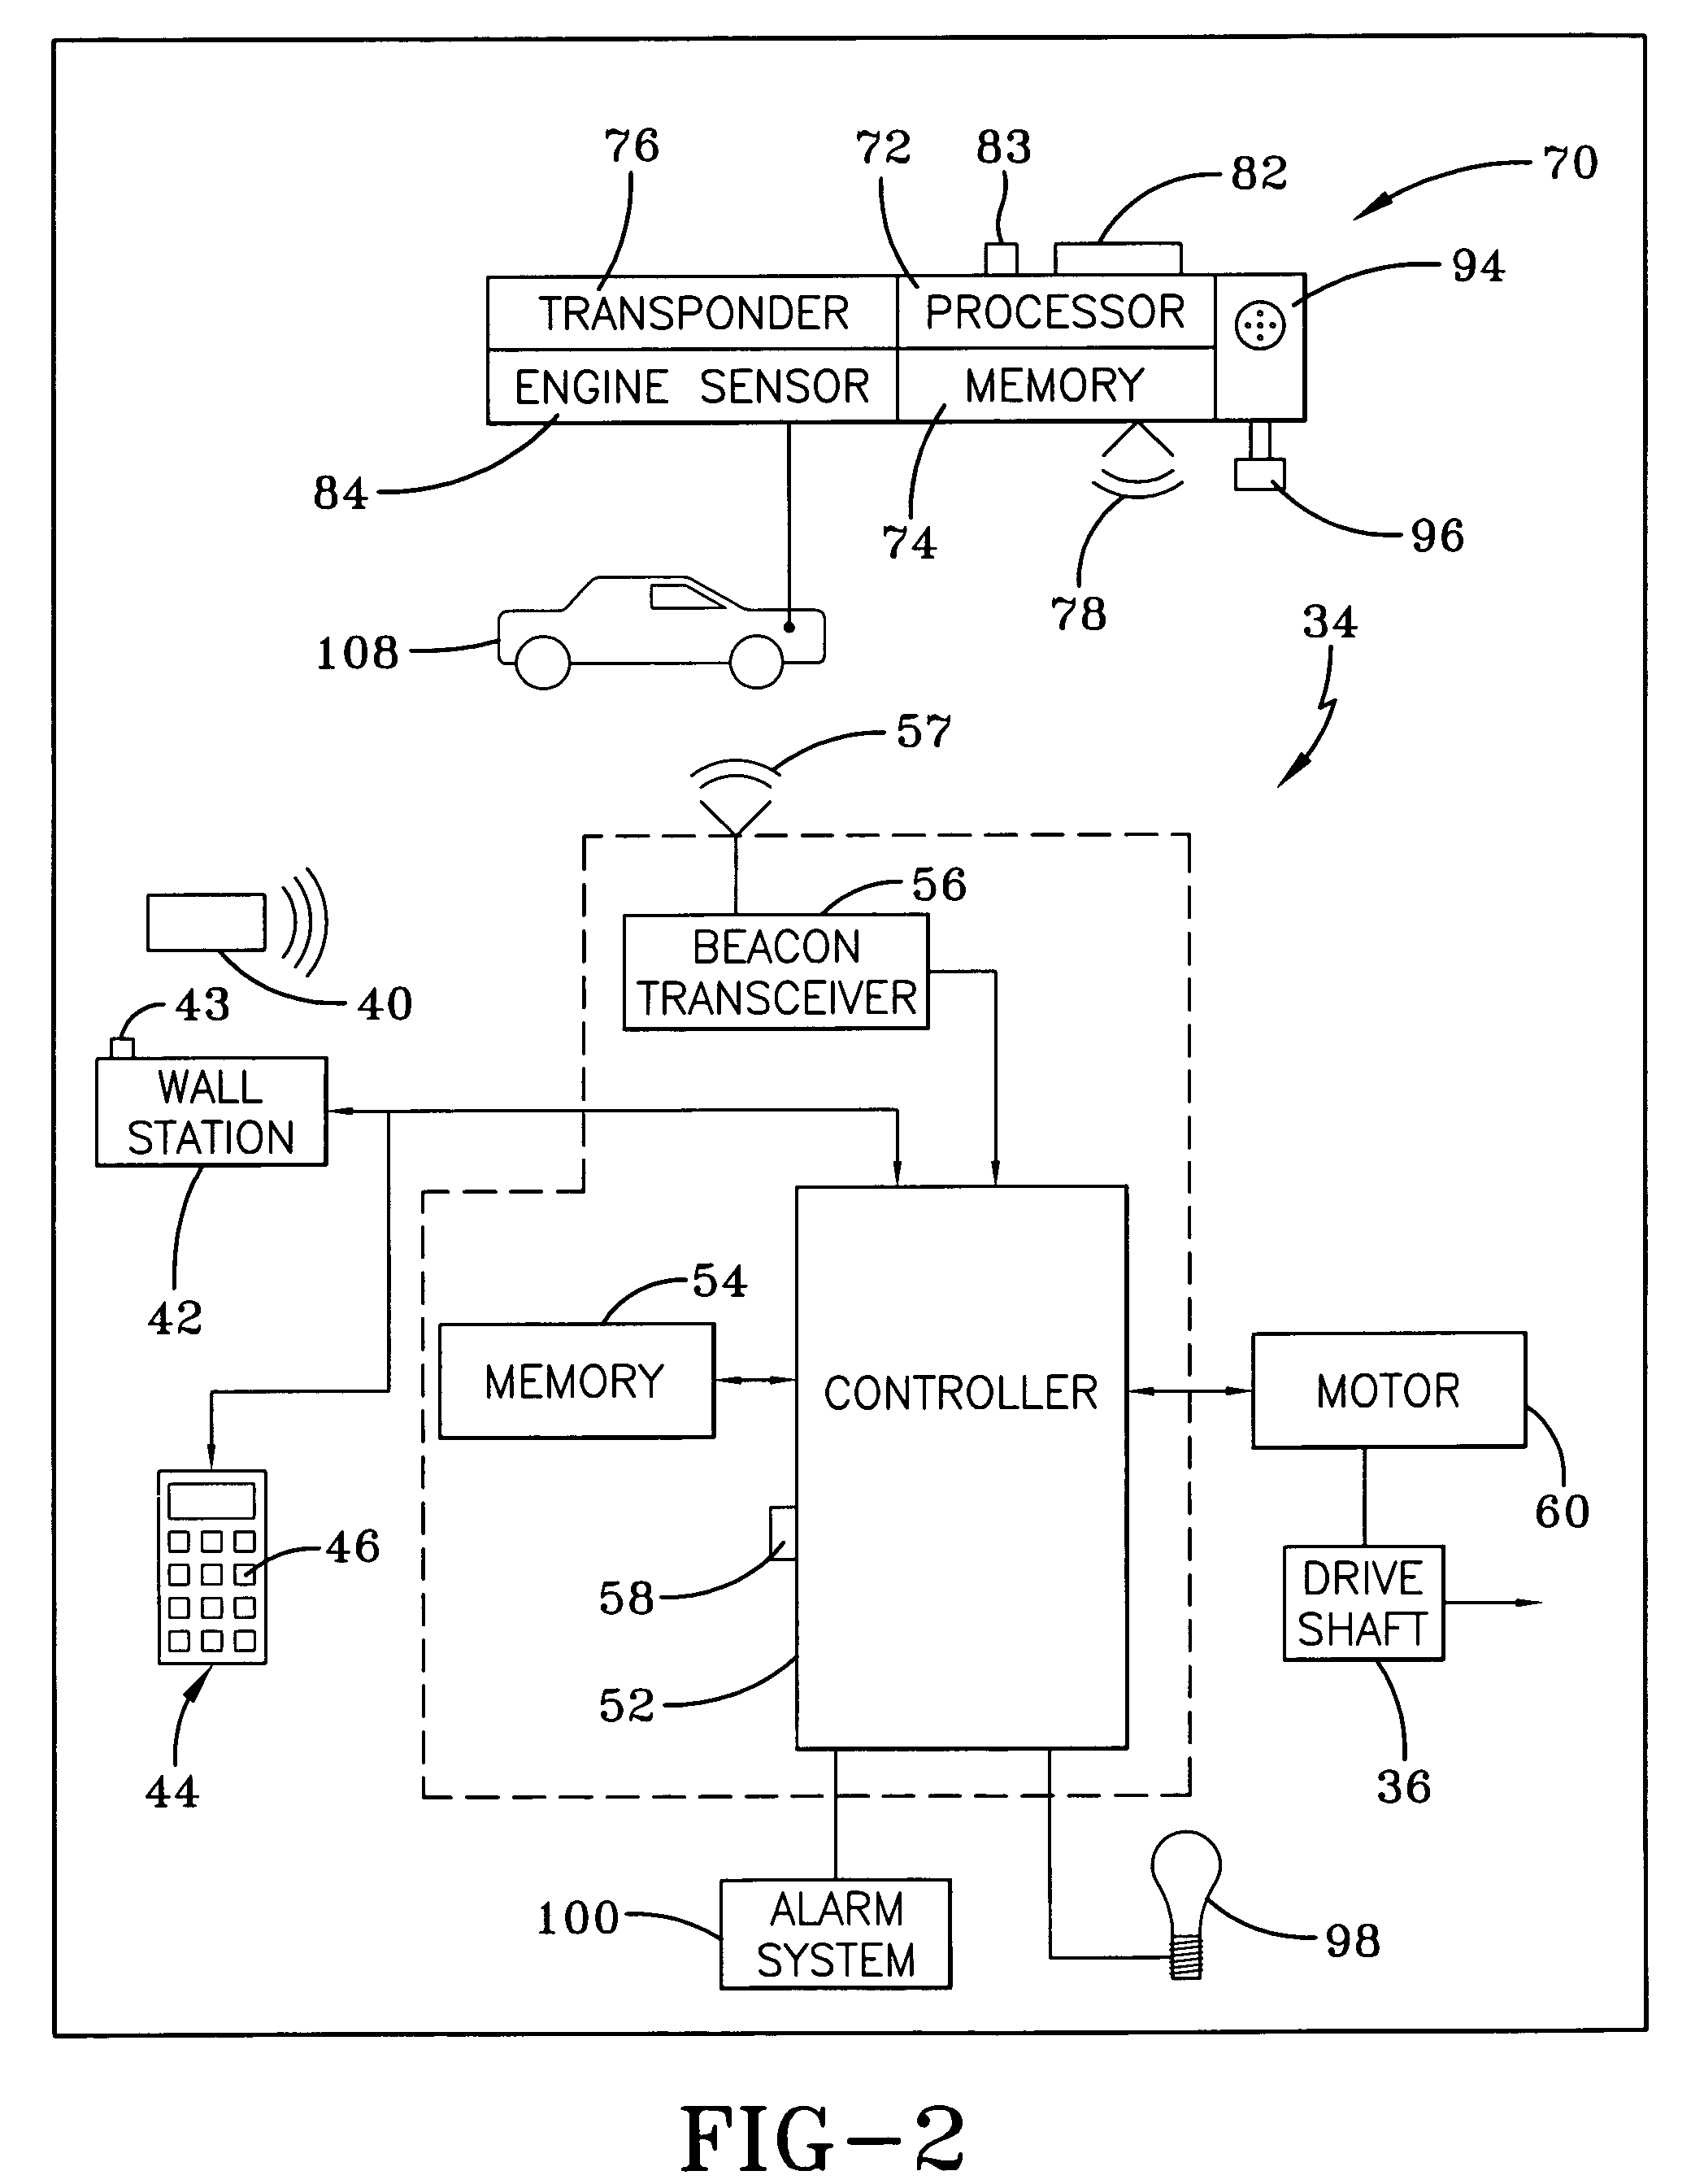 System for automatically moving access barriers and methods for adjusting system sensitivity